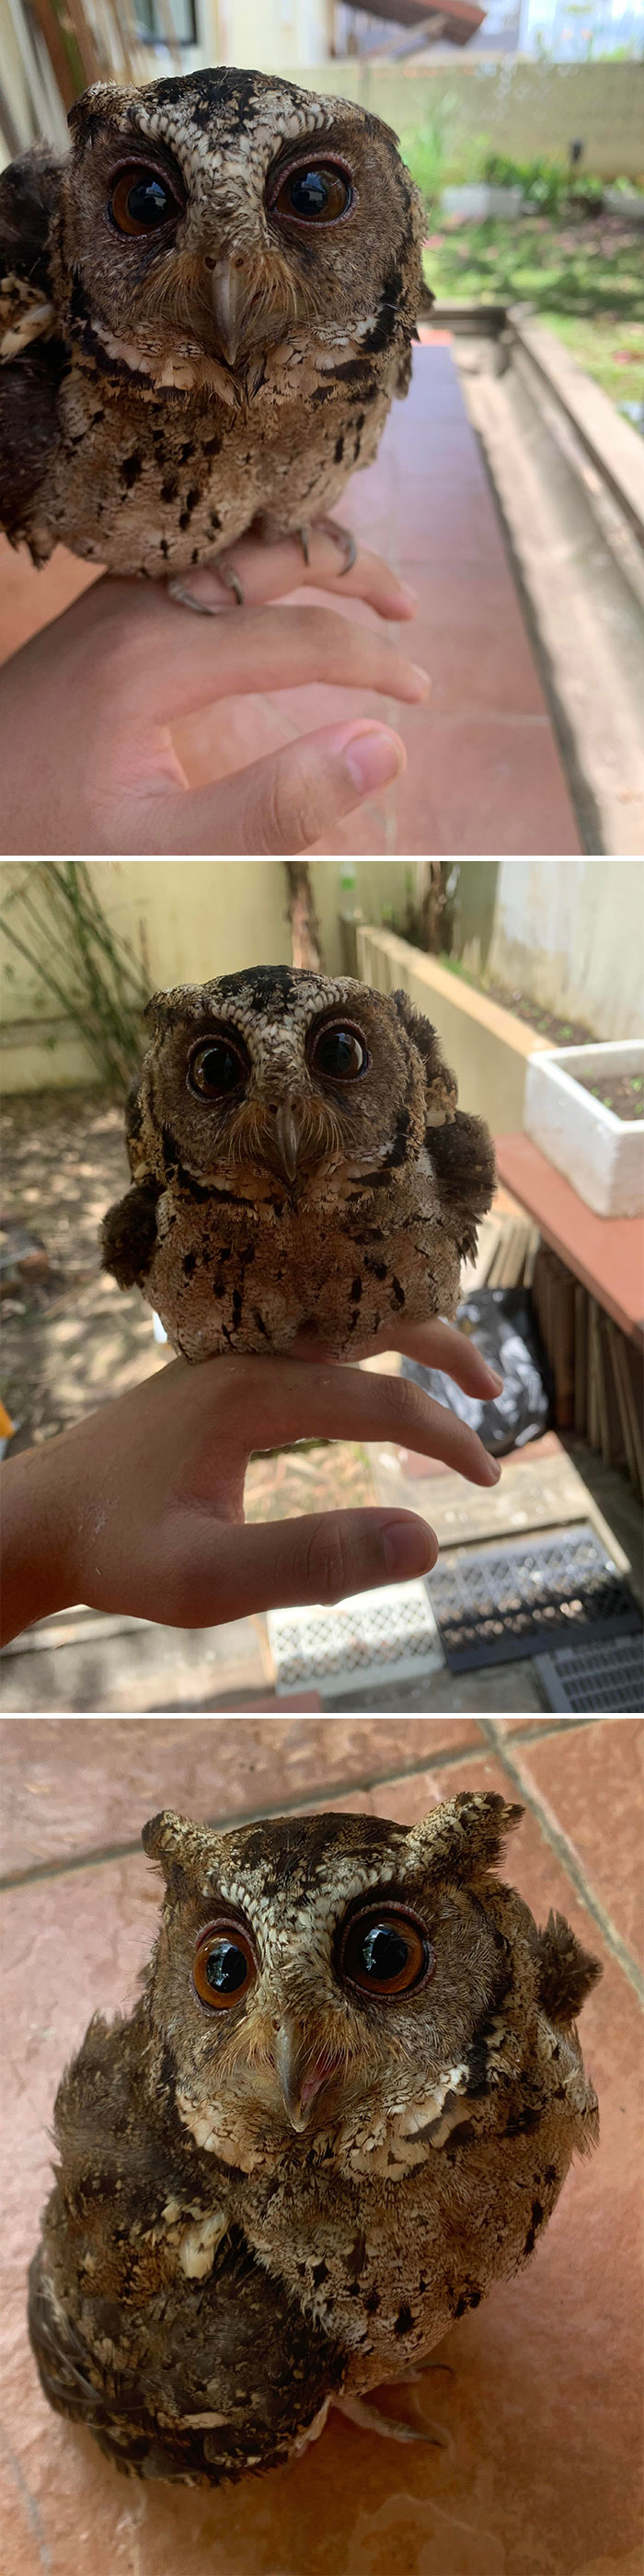 Owl I Found On The Road, It Couldn’t Fly So I Kept It In My Backyard For A Few Hours Till It Flew Away